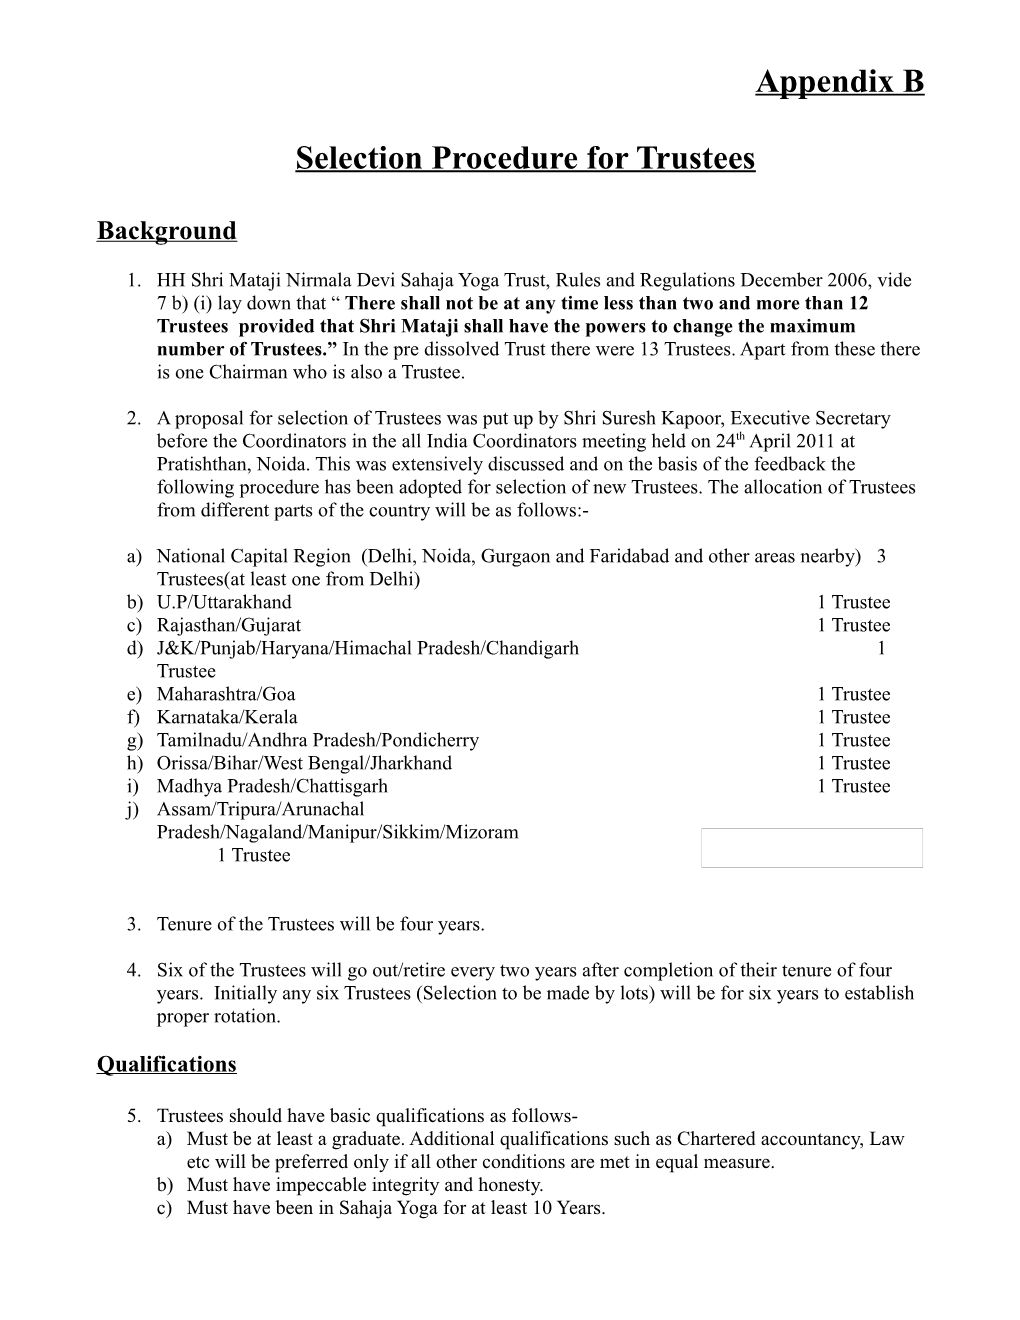 Selection Procedure for Trustees